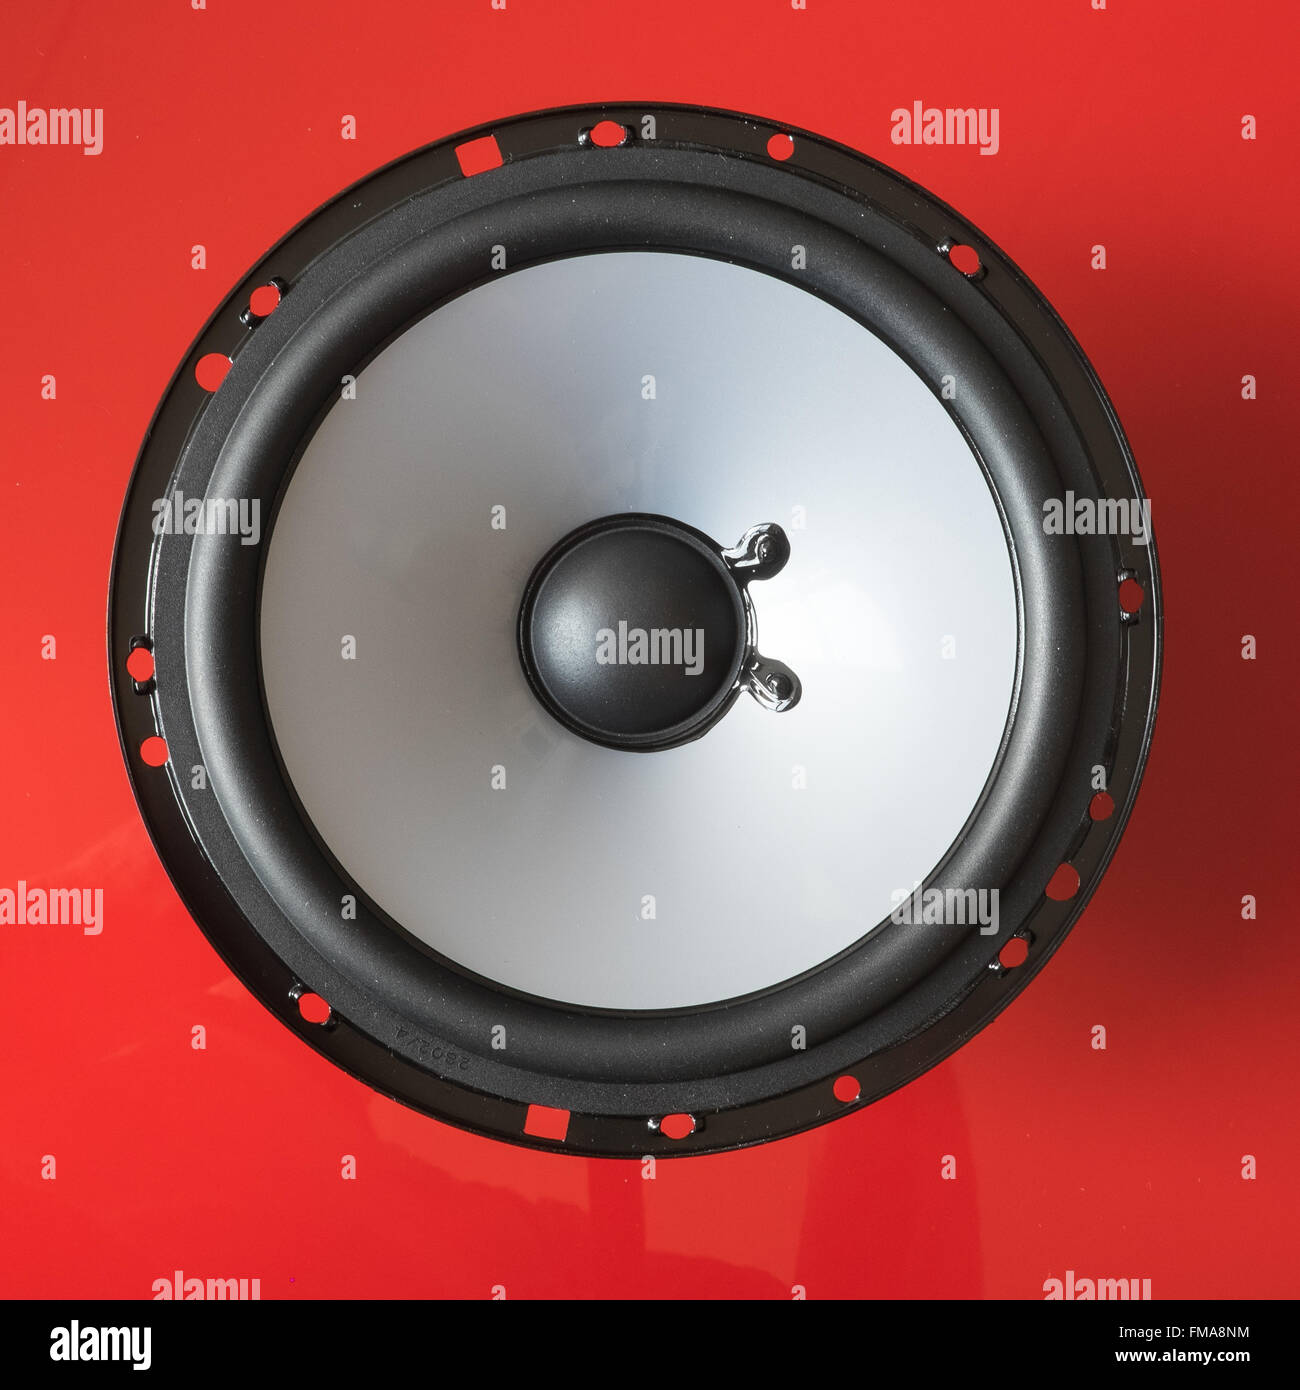 Speaker bass componenet on red background Stock Photo